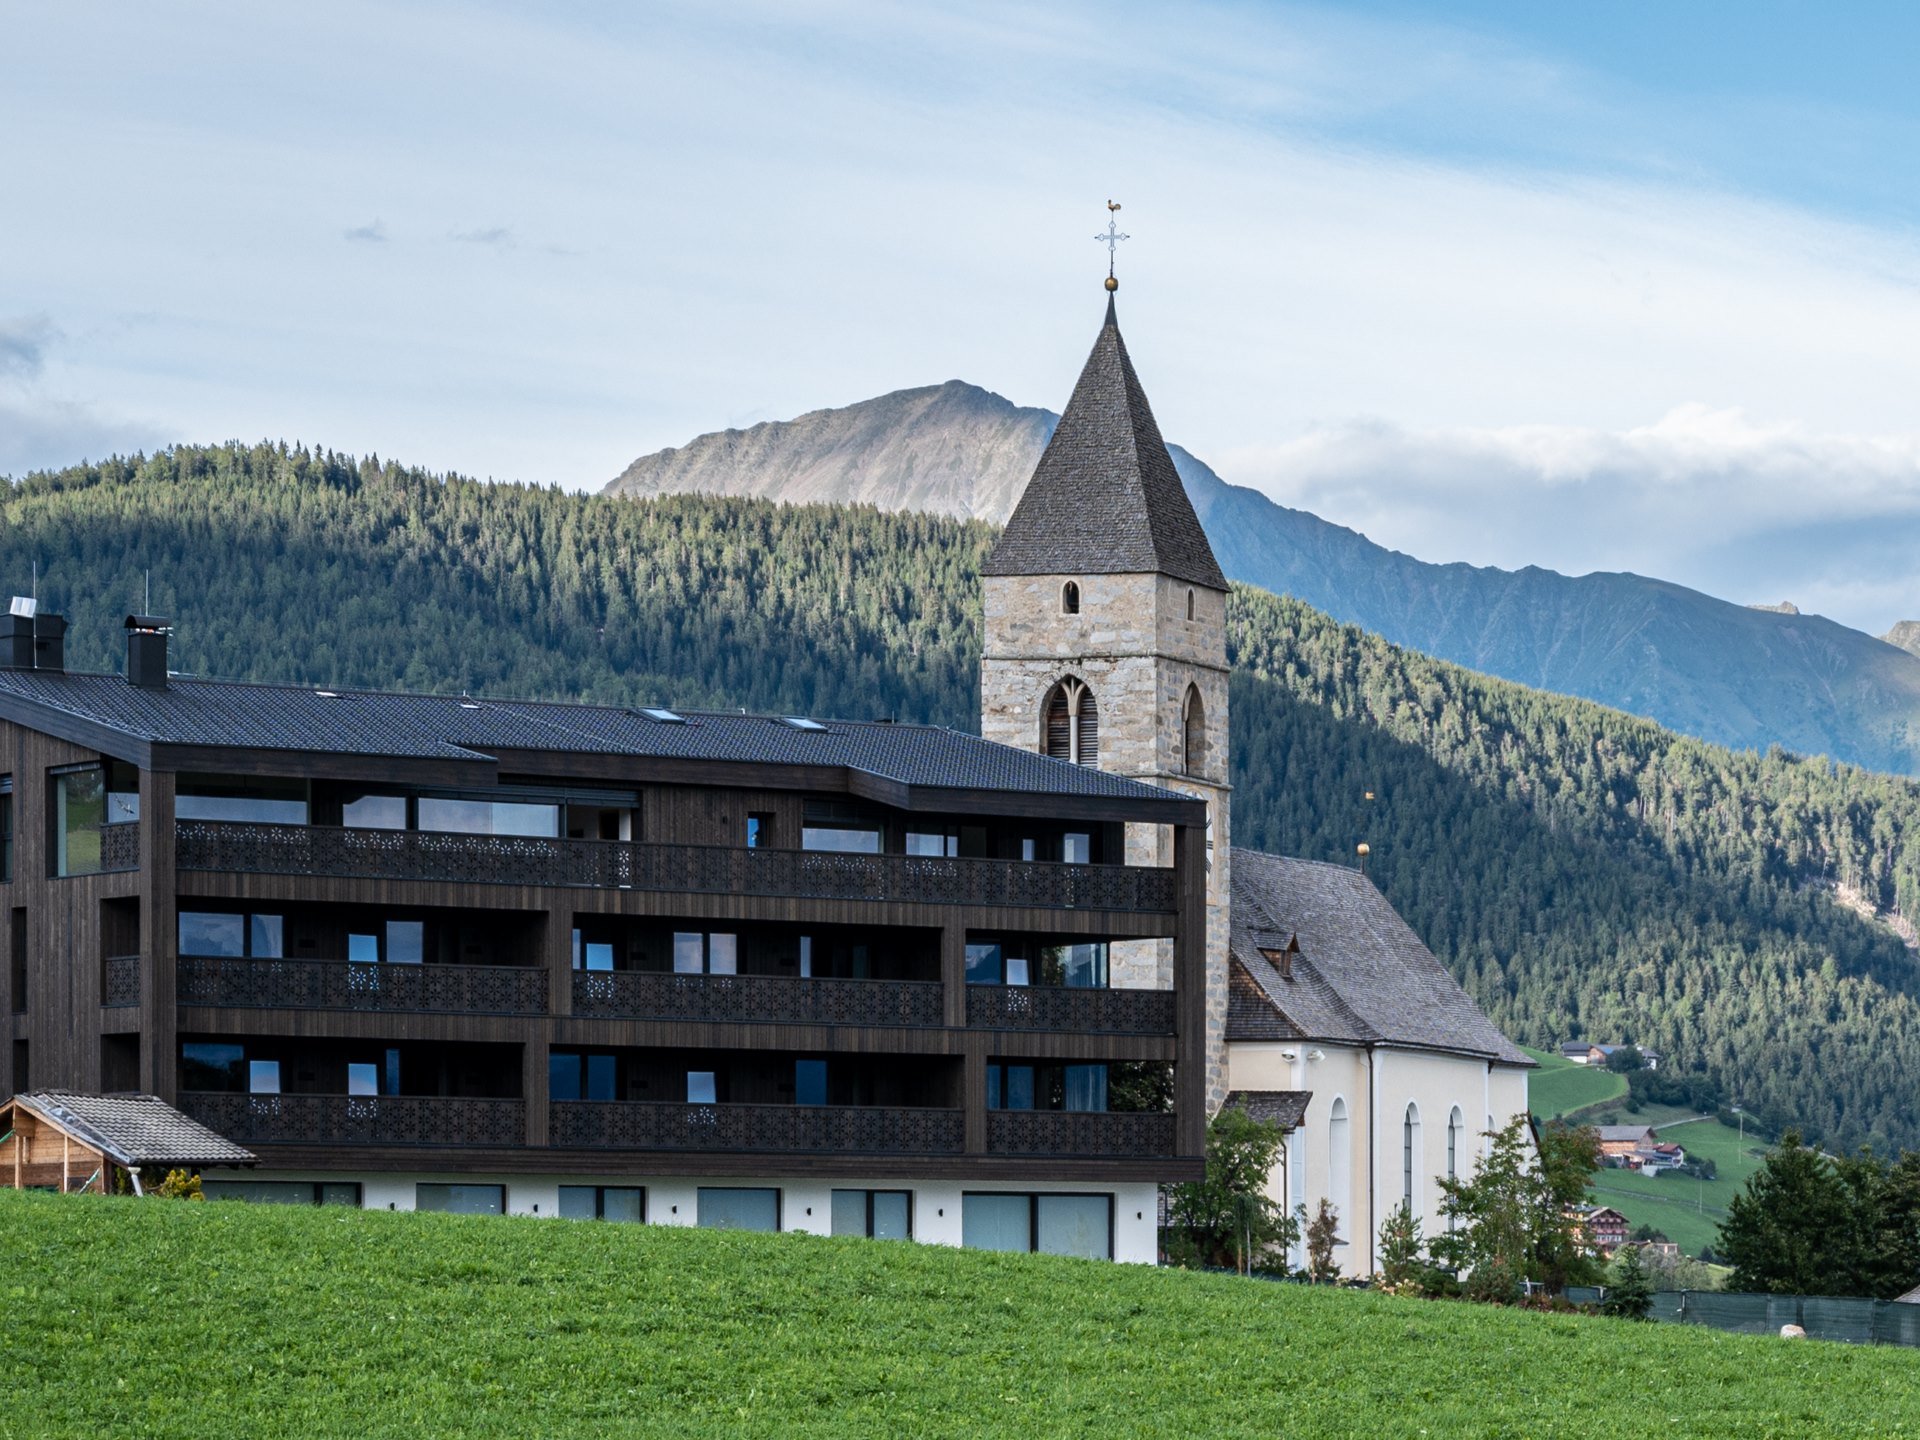 Holiday in South Tyrol: visit Mountain Lodge Margit! ❋